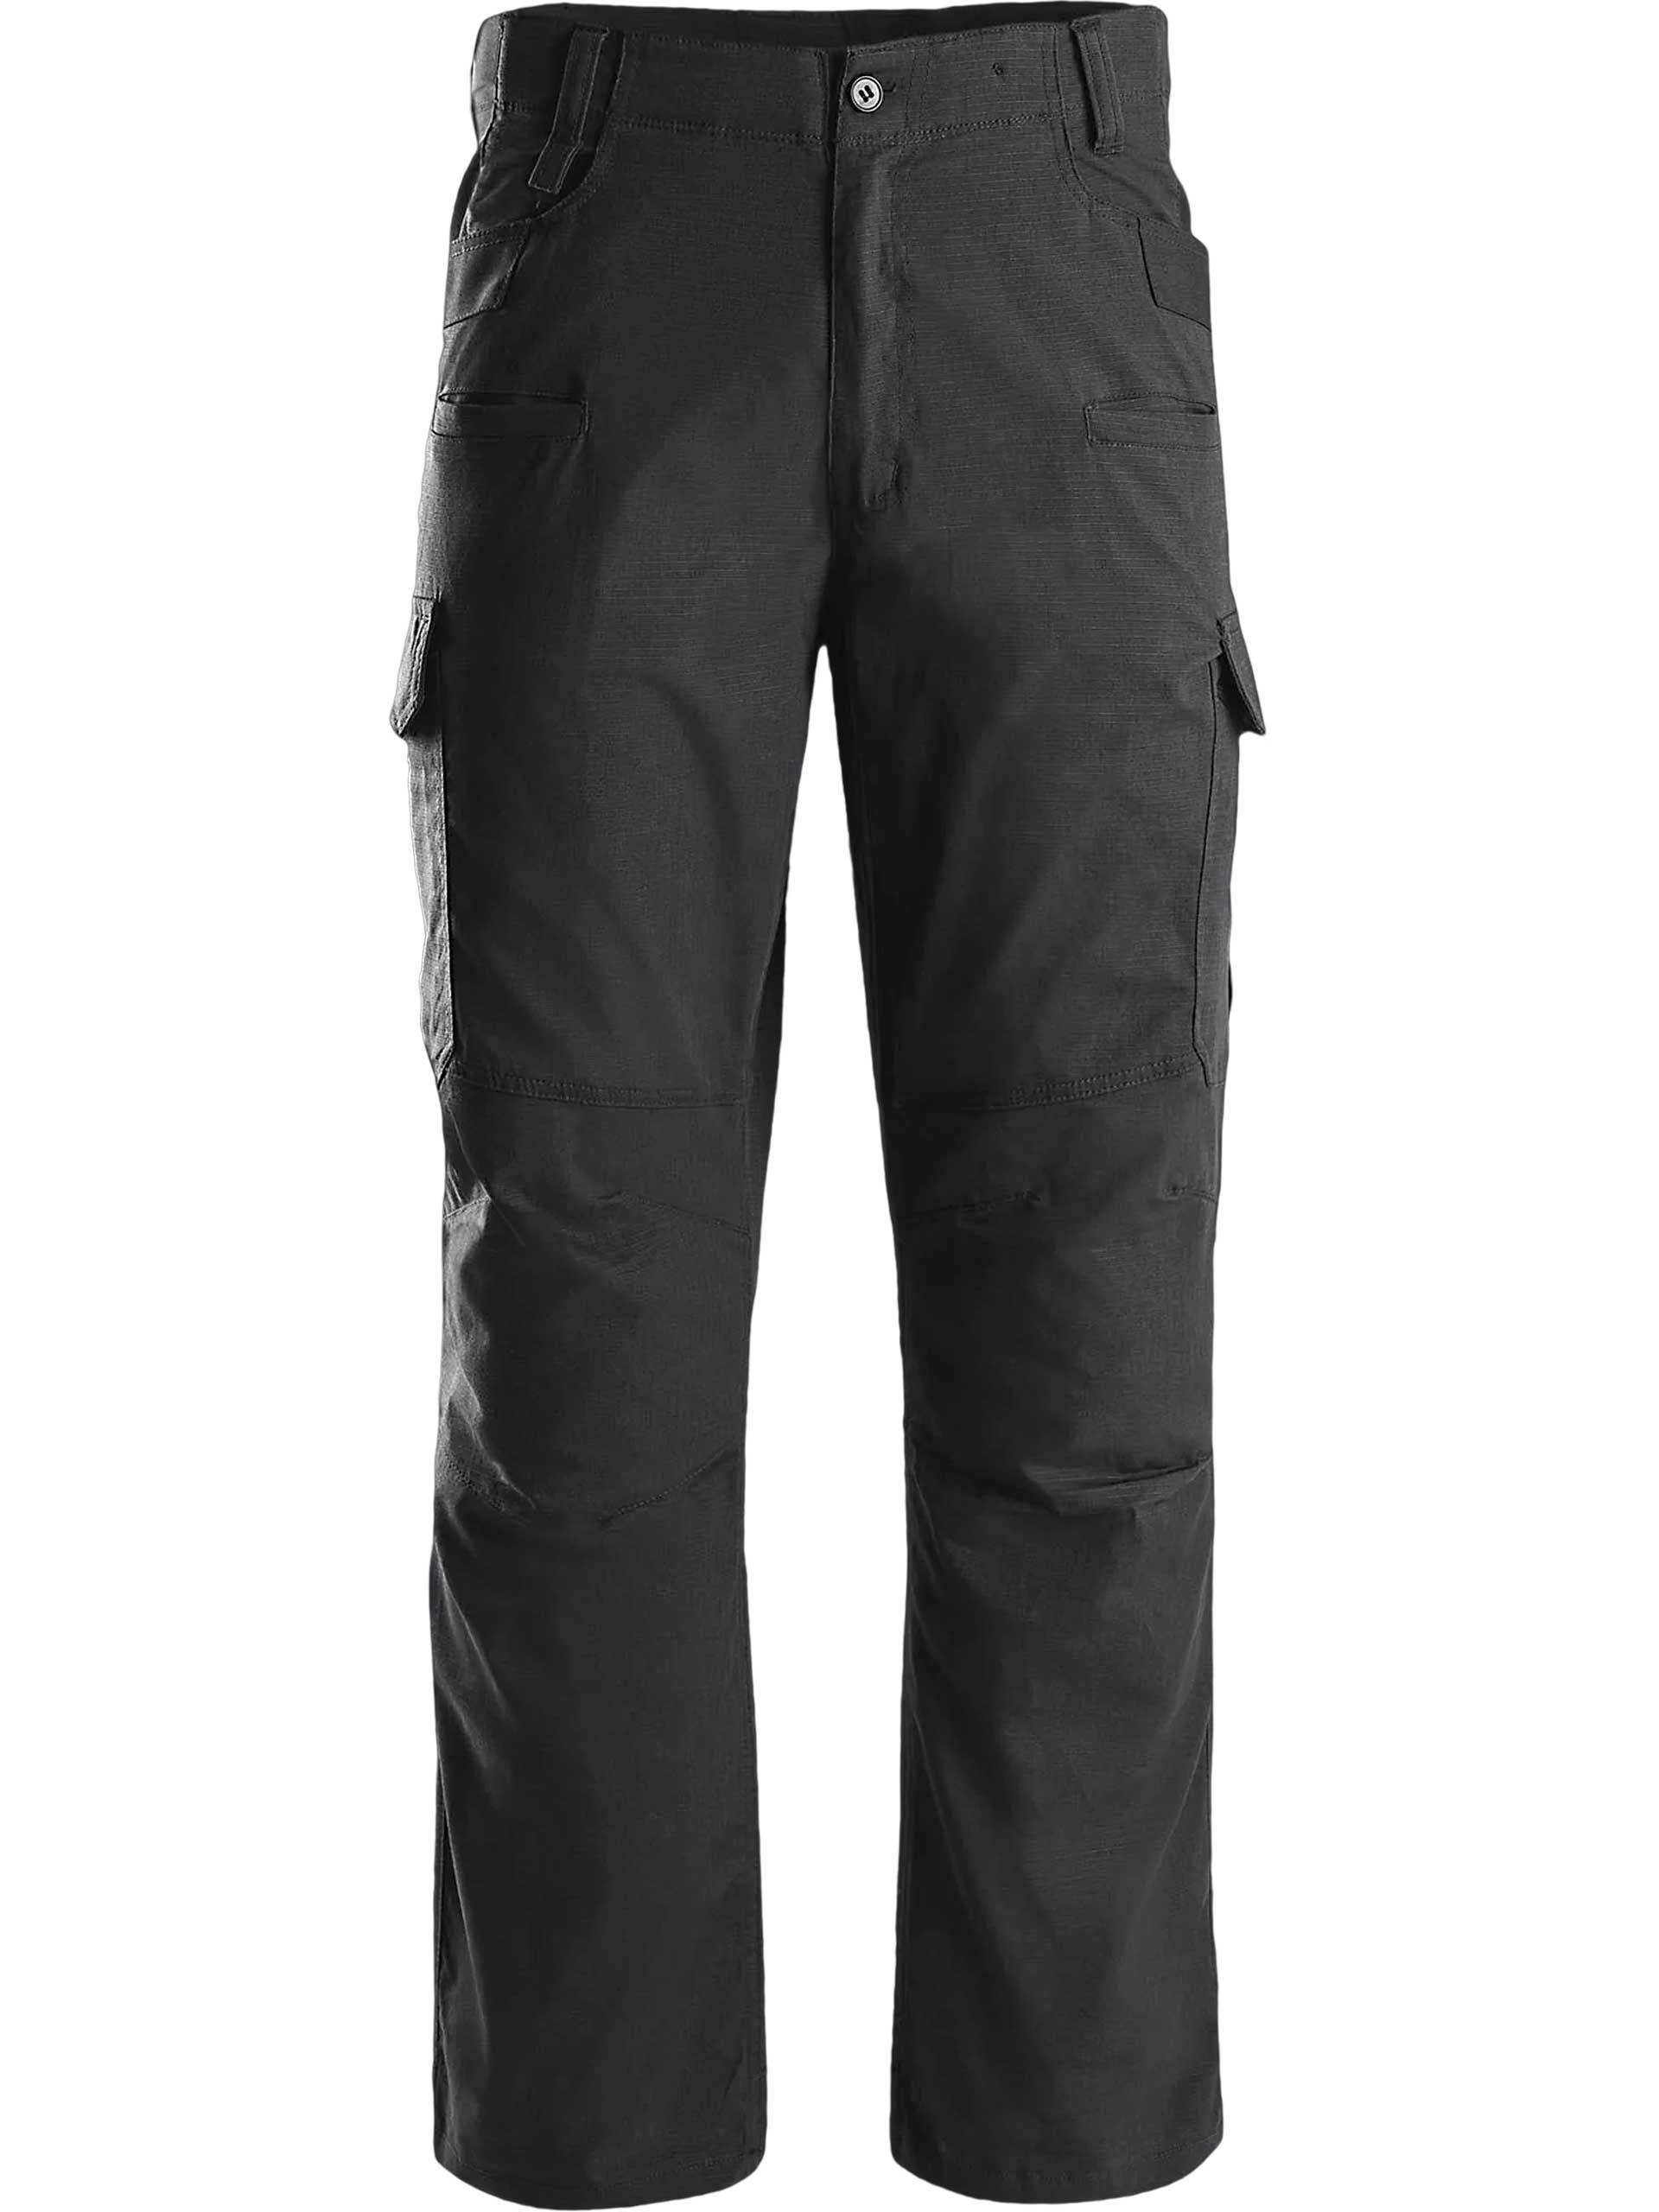 Highlander wide cargo pants, Men's Fashion, Bottoms, Trousers on Carousell